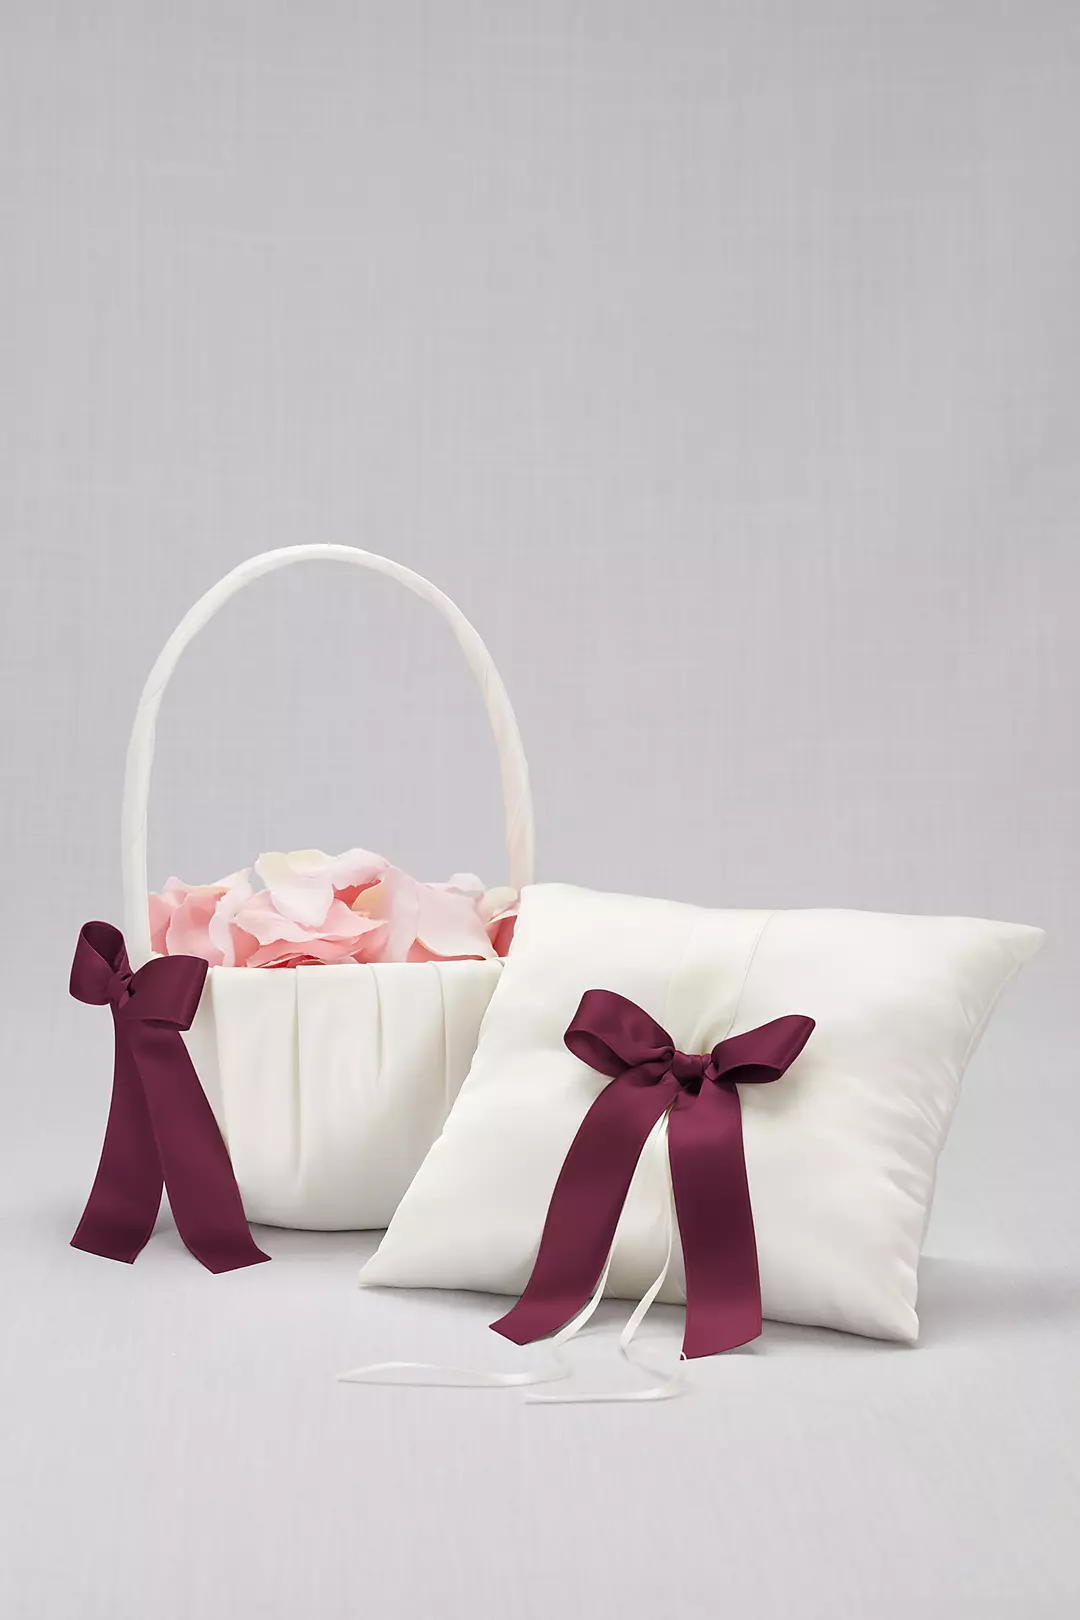 DB Exclusive Single Ribbon Pillow and Basket Image